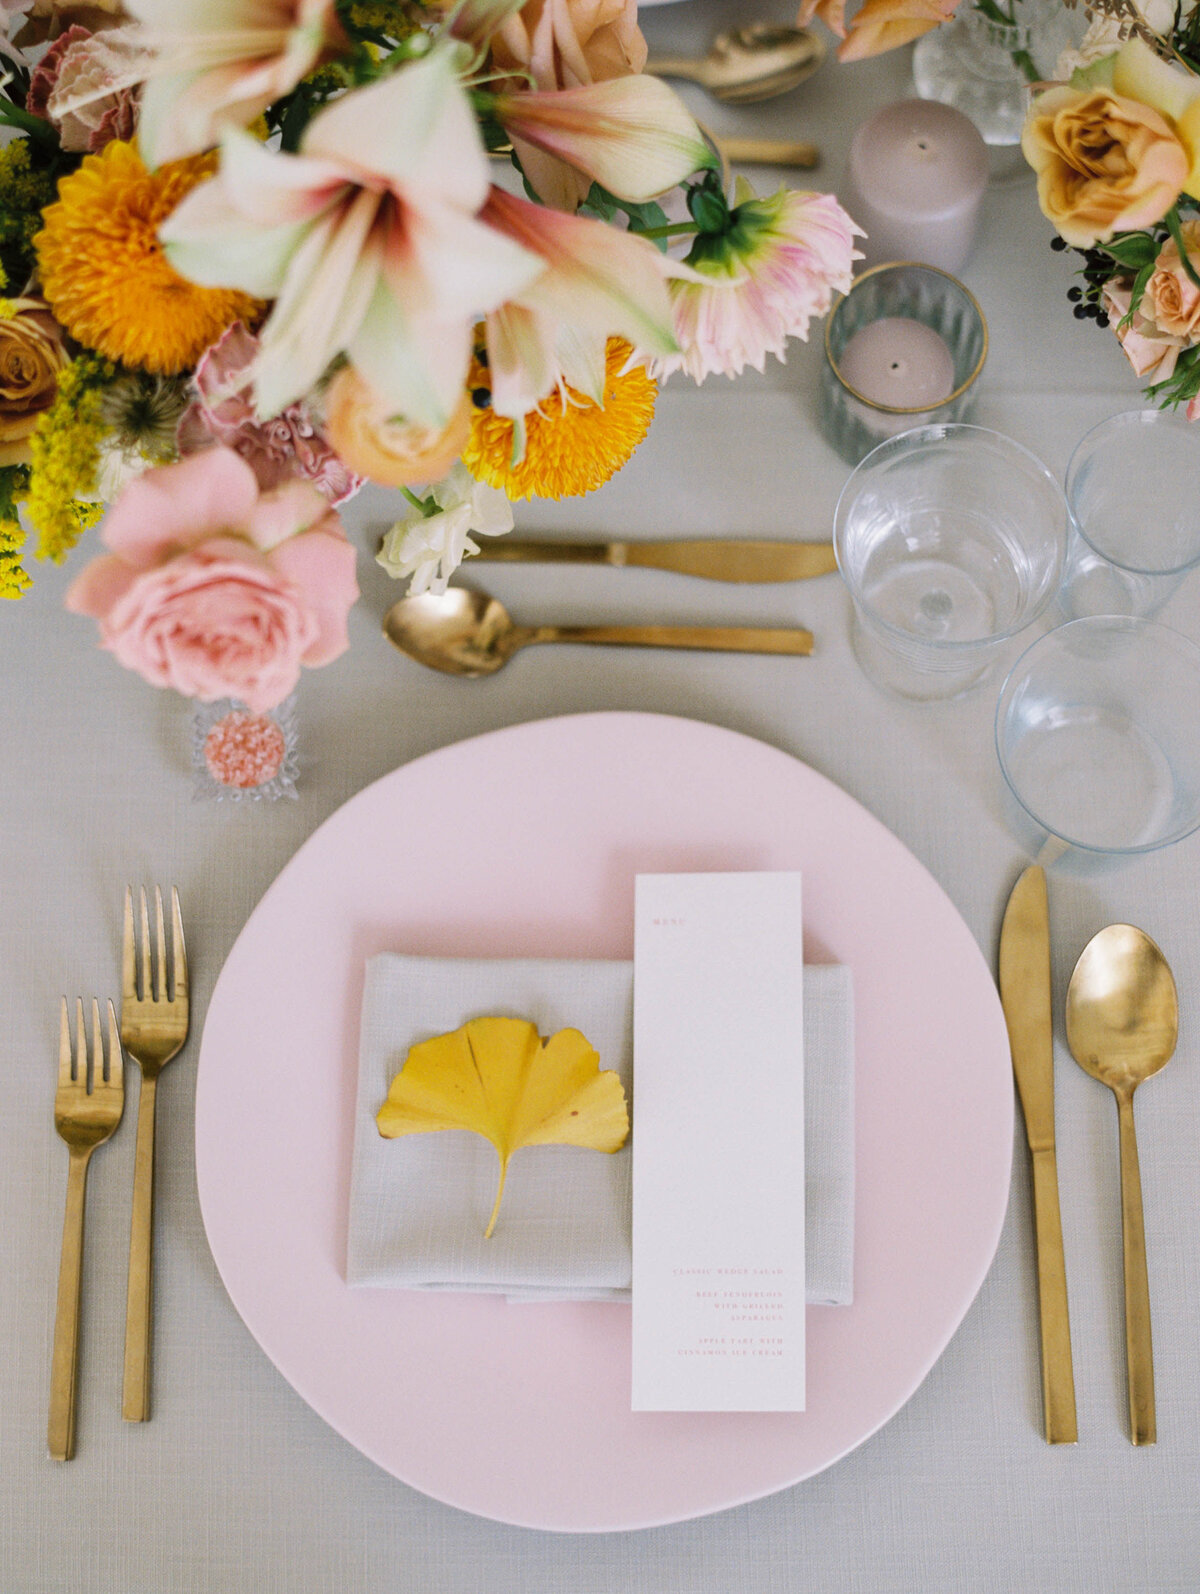 max-owens-design-yellow-wedding-flowers-08-place-setting-gingko